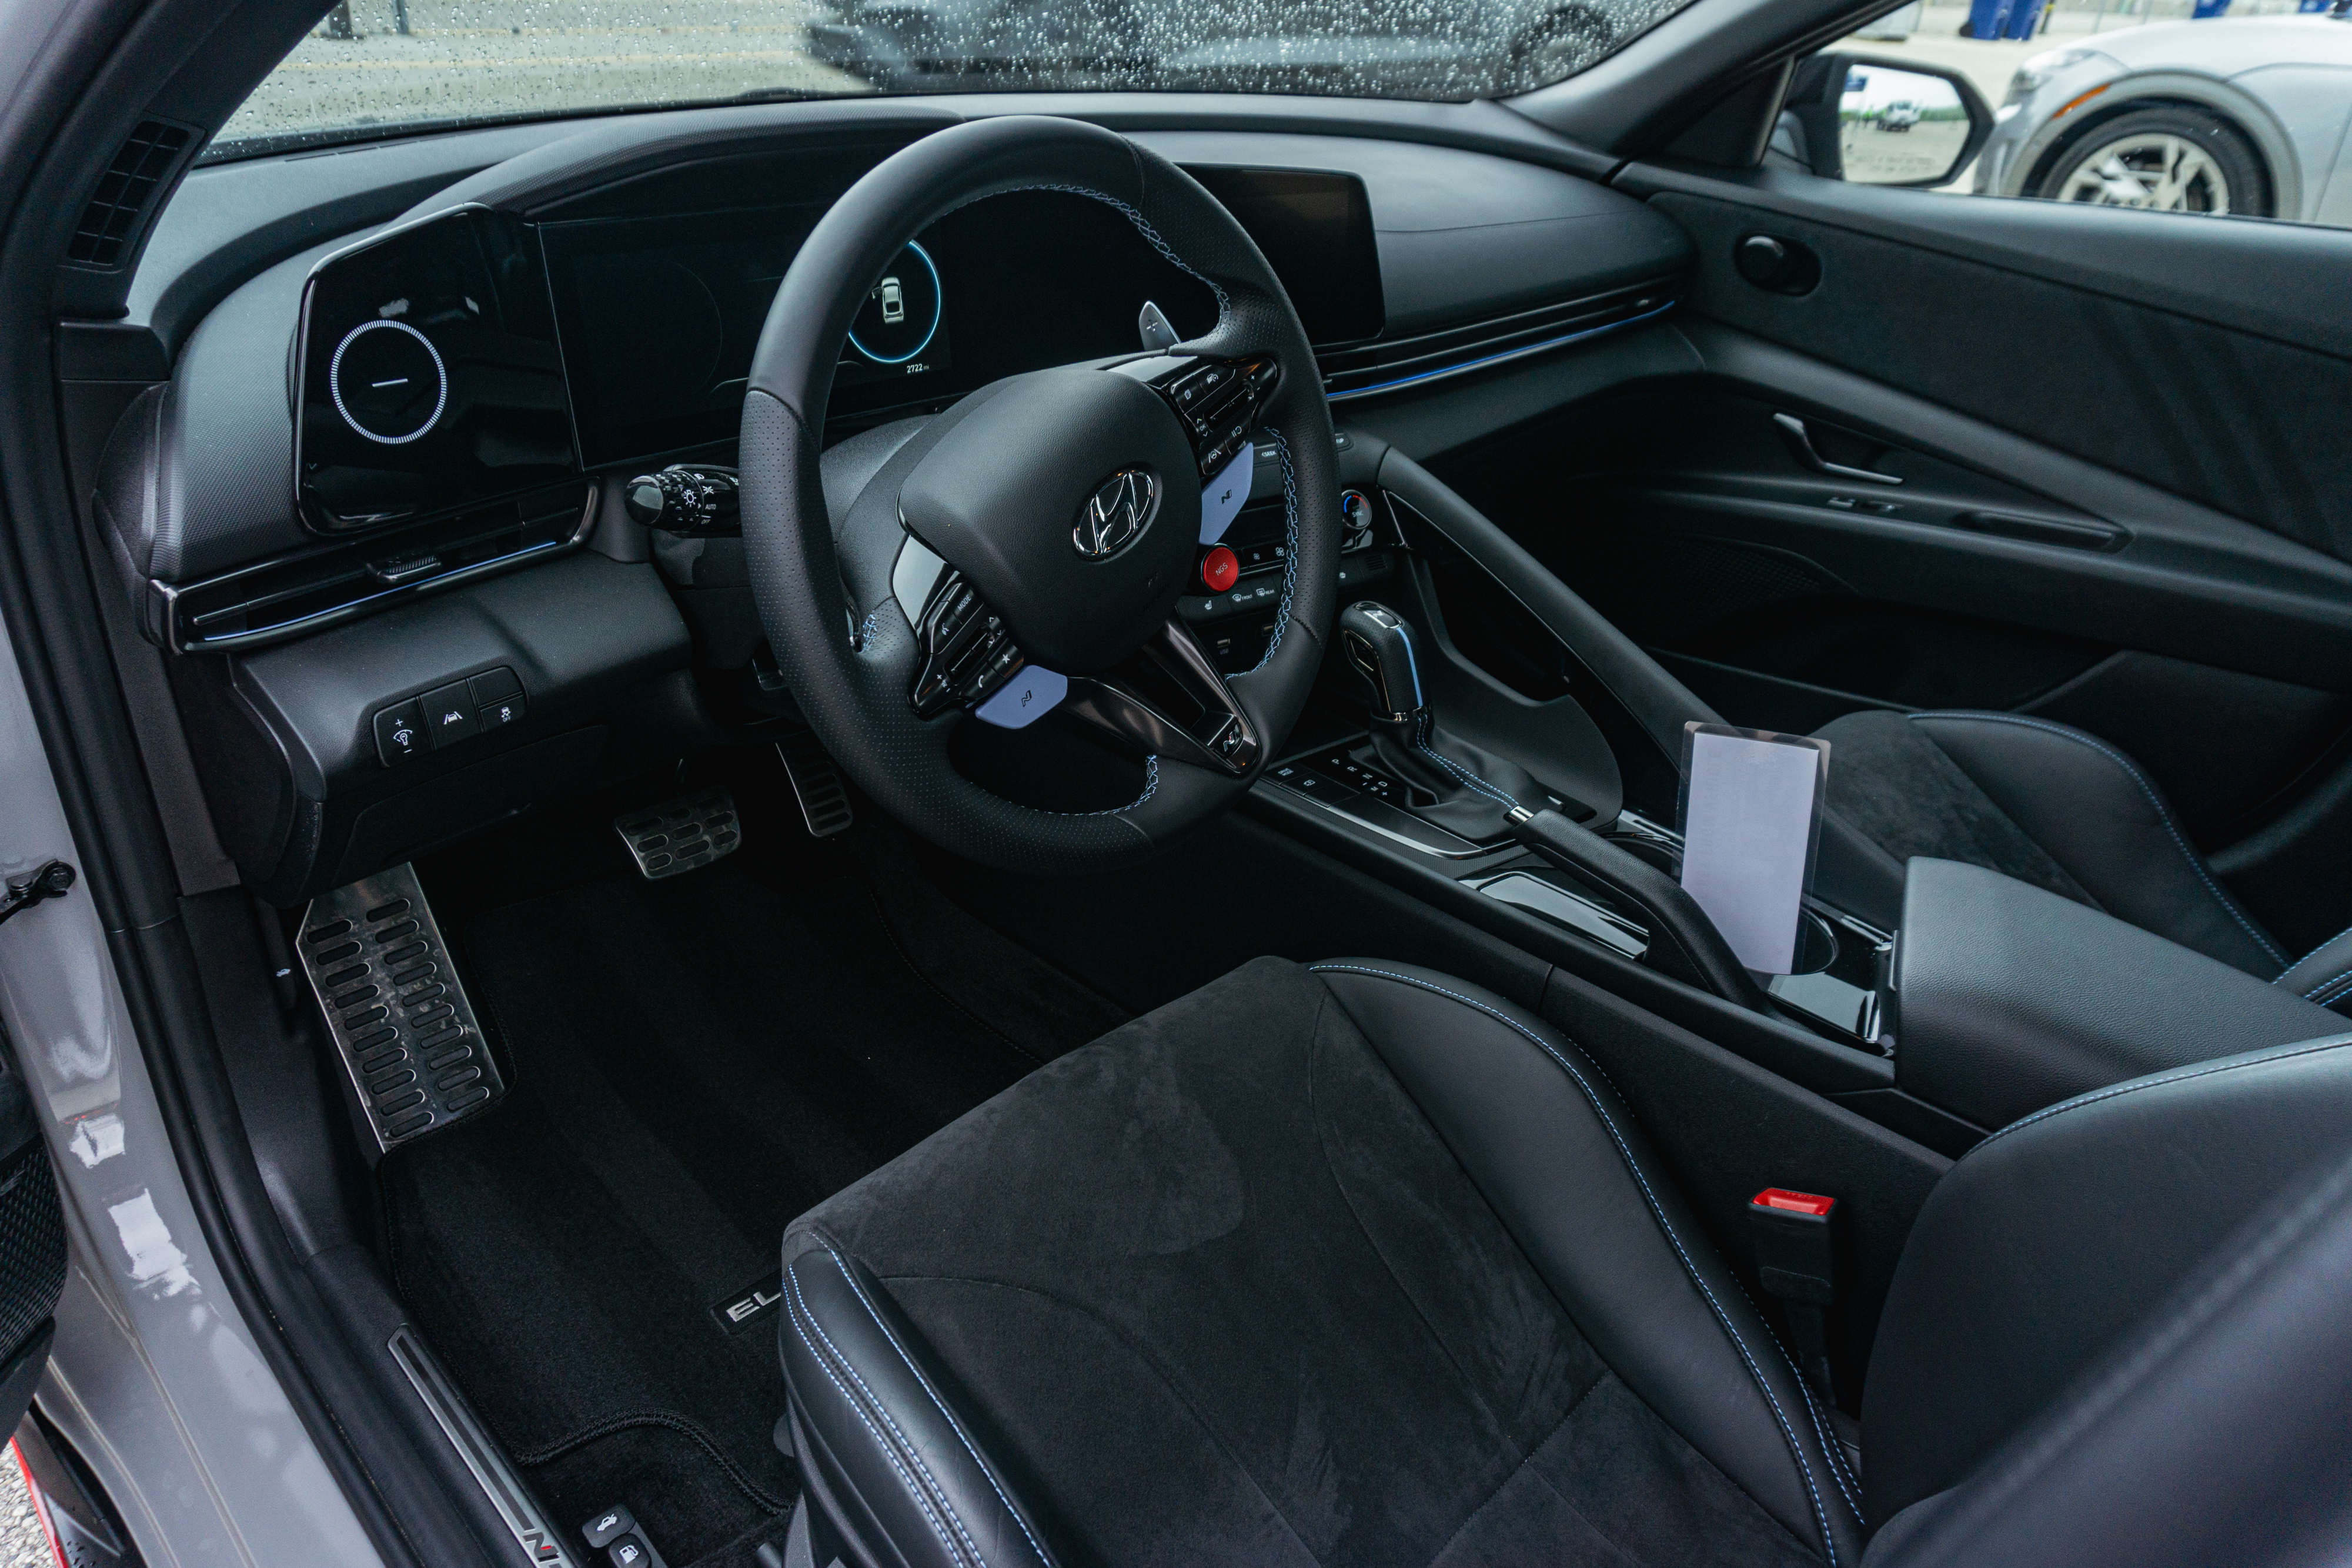 The black-and-blue front seats and dashboard of a 2022 Hyundai Elantra N DCT